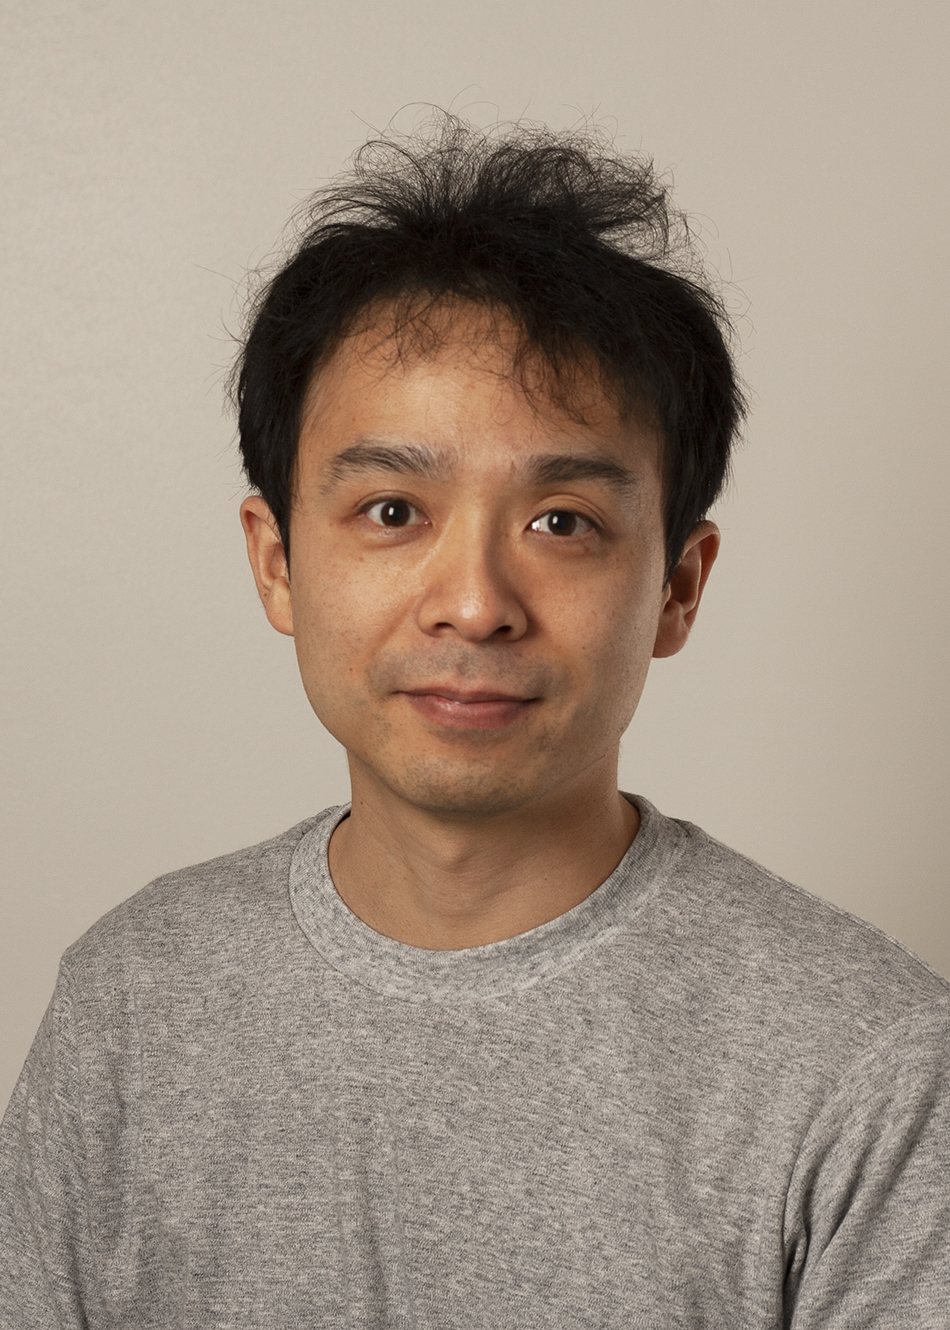 Taro in a gray shirt on a light background